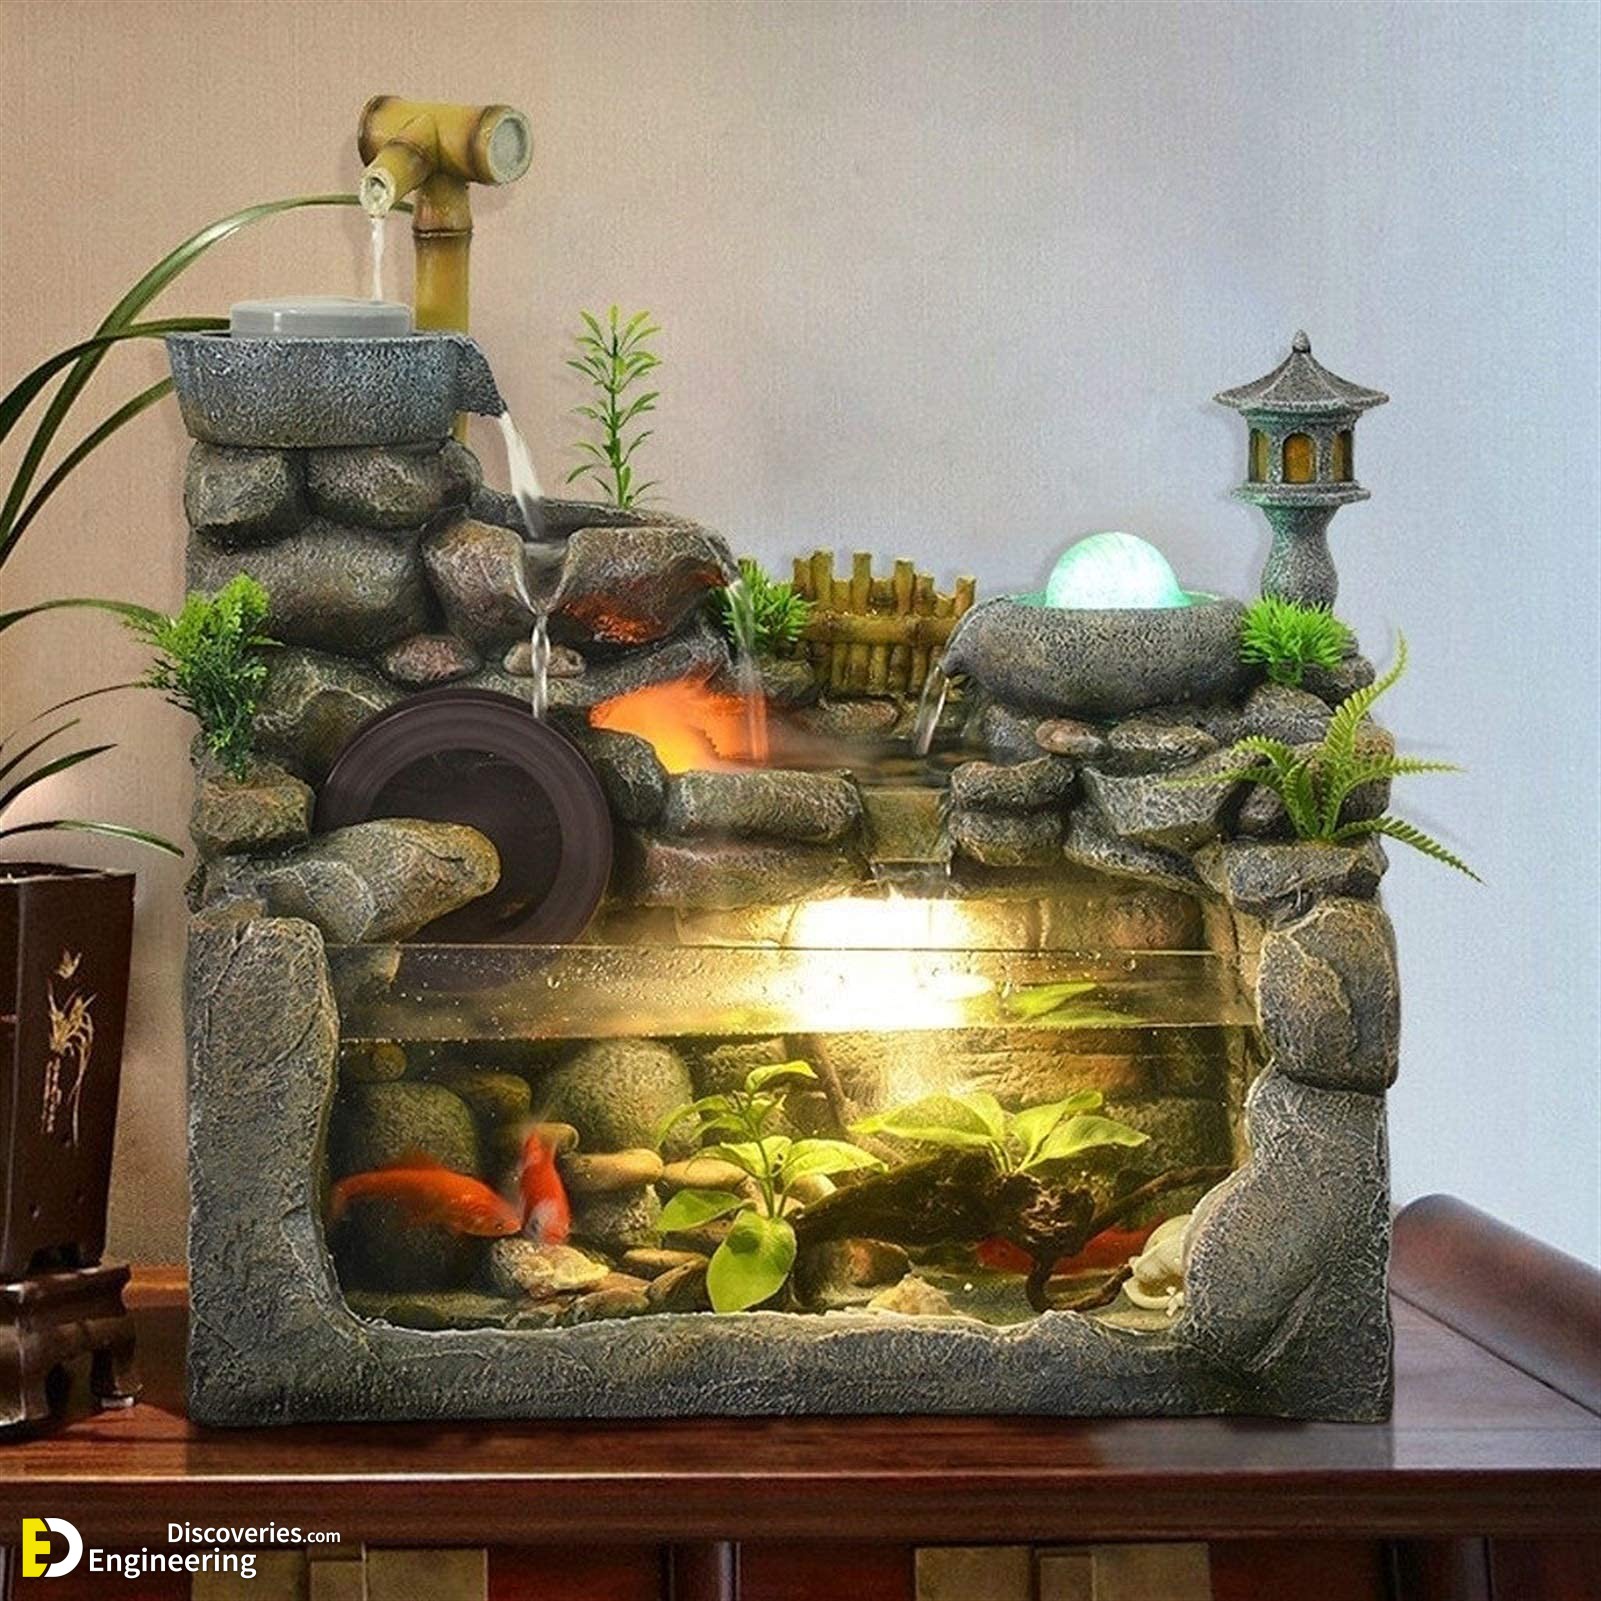 29 engineering discoveries amazing water fountain ideas to transform your home into a serene oasis